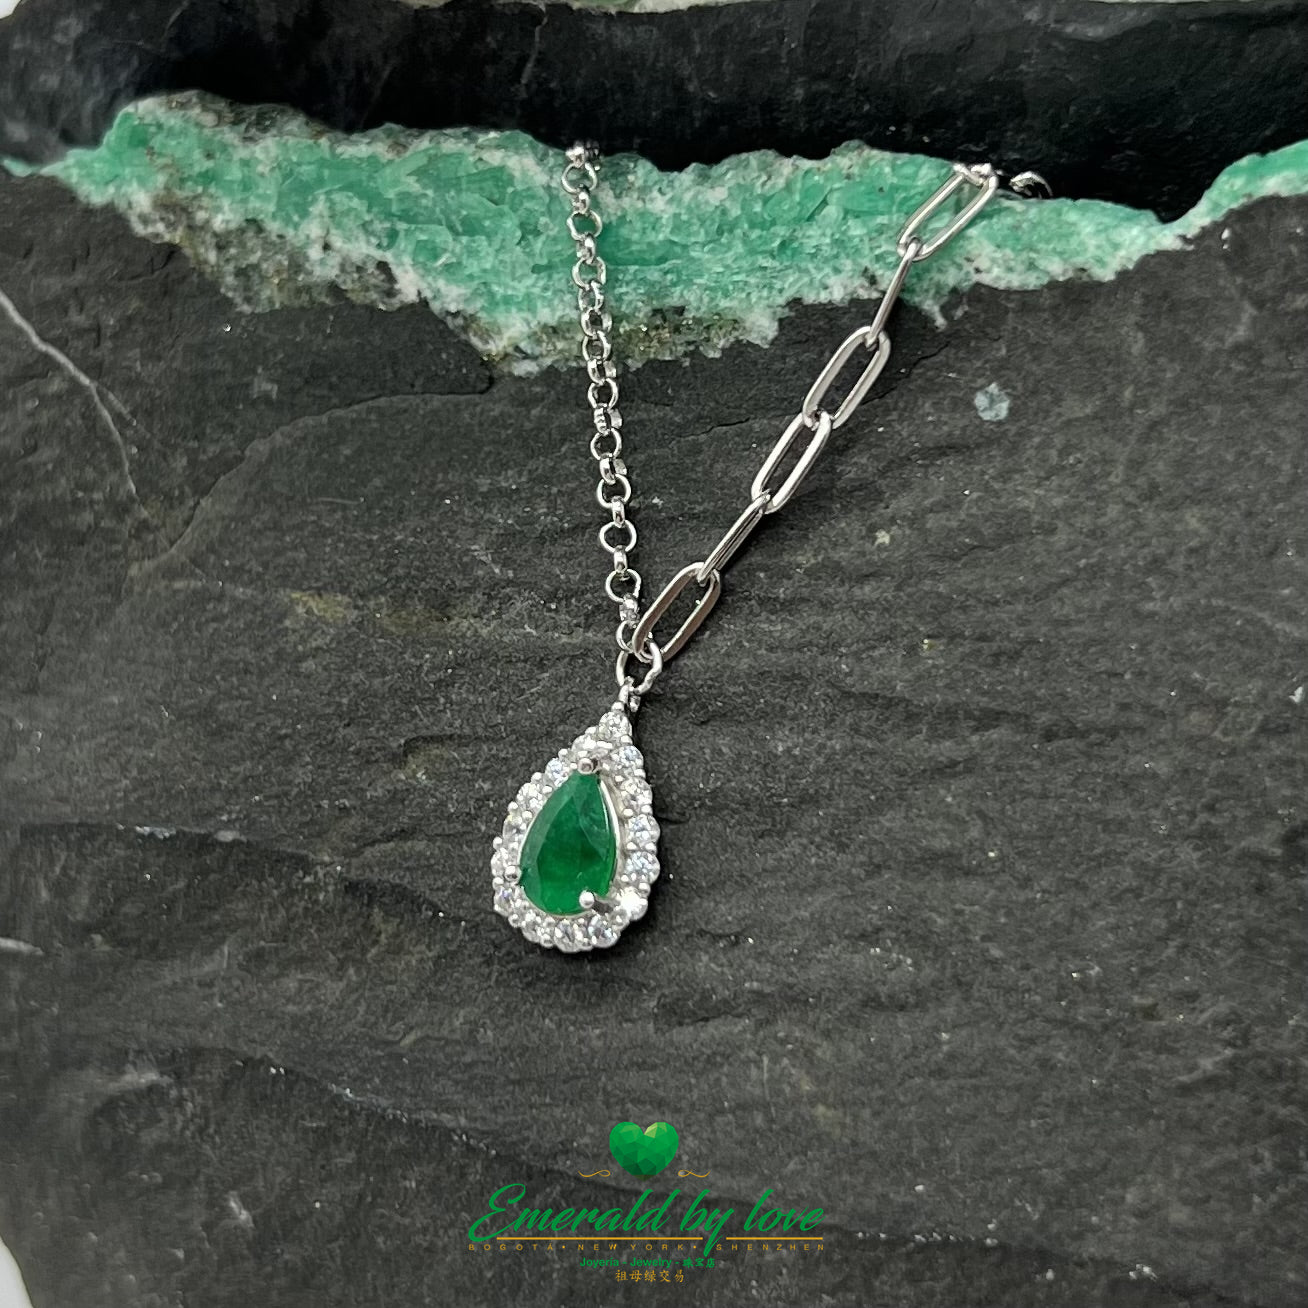 Pear-Shaped Marquise Emerald Pendant with Surrounding Cubic Zirconia and Double Chain